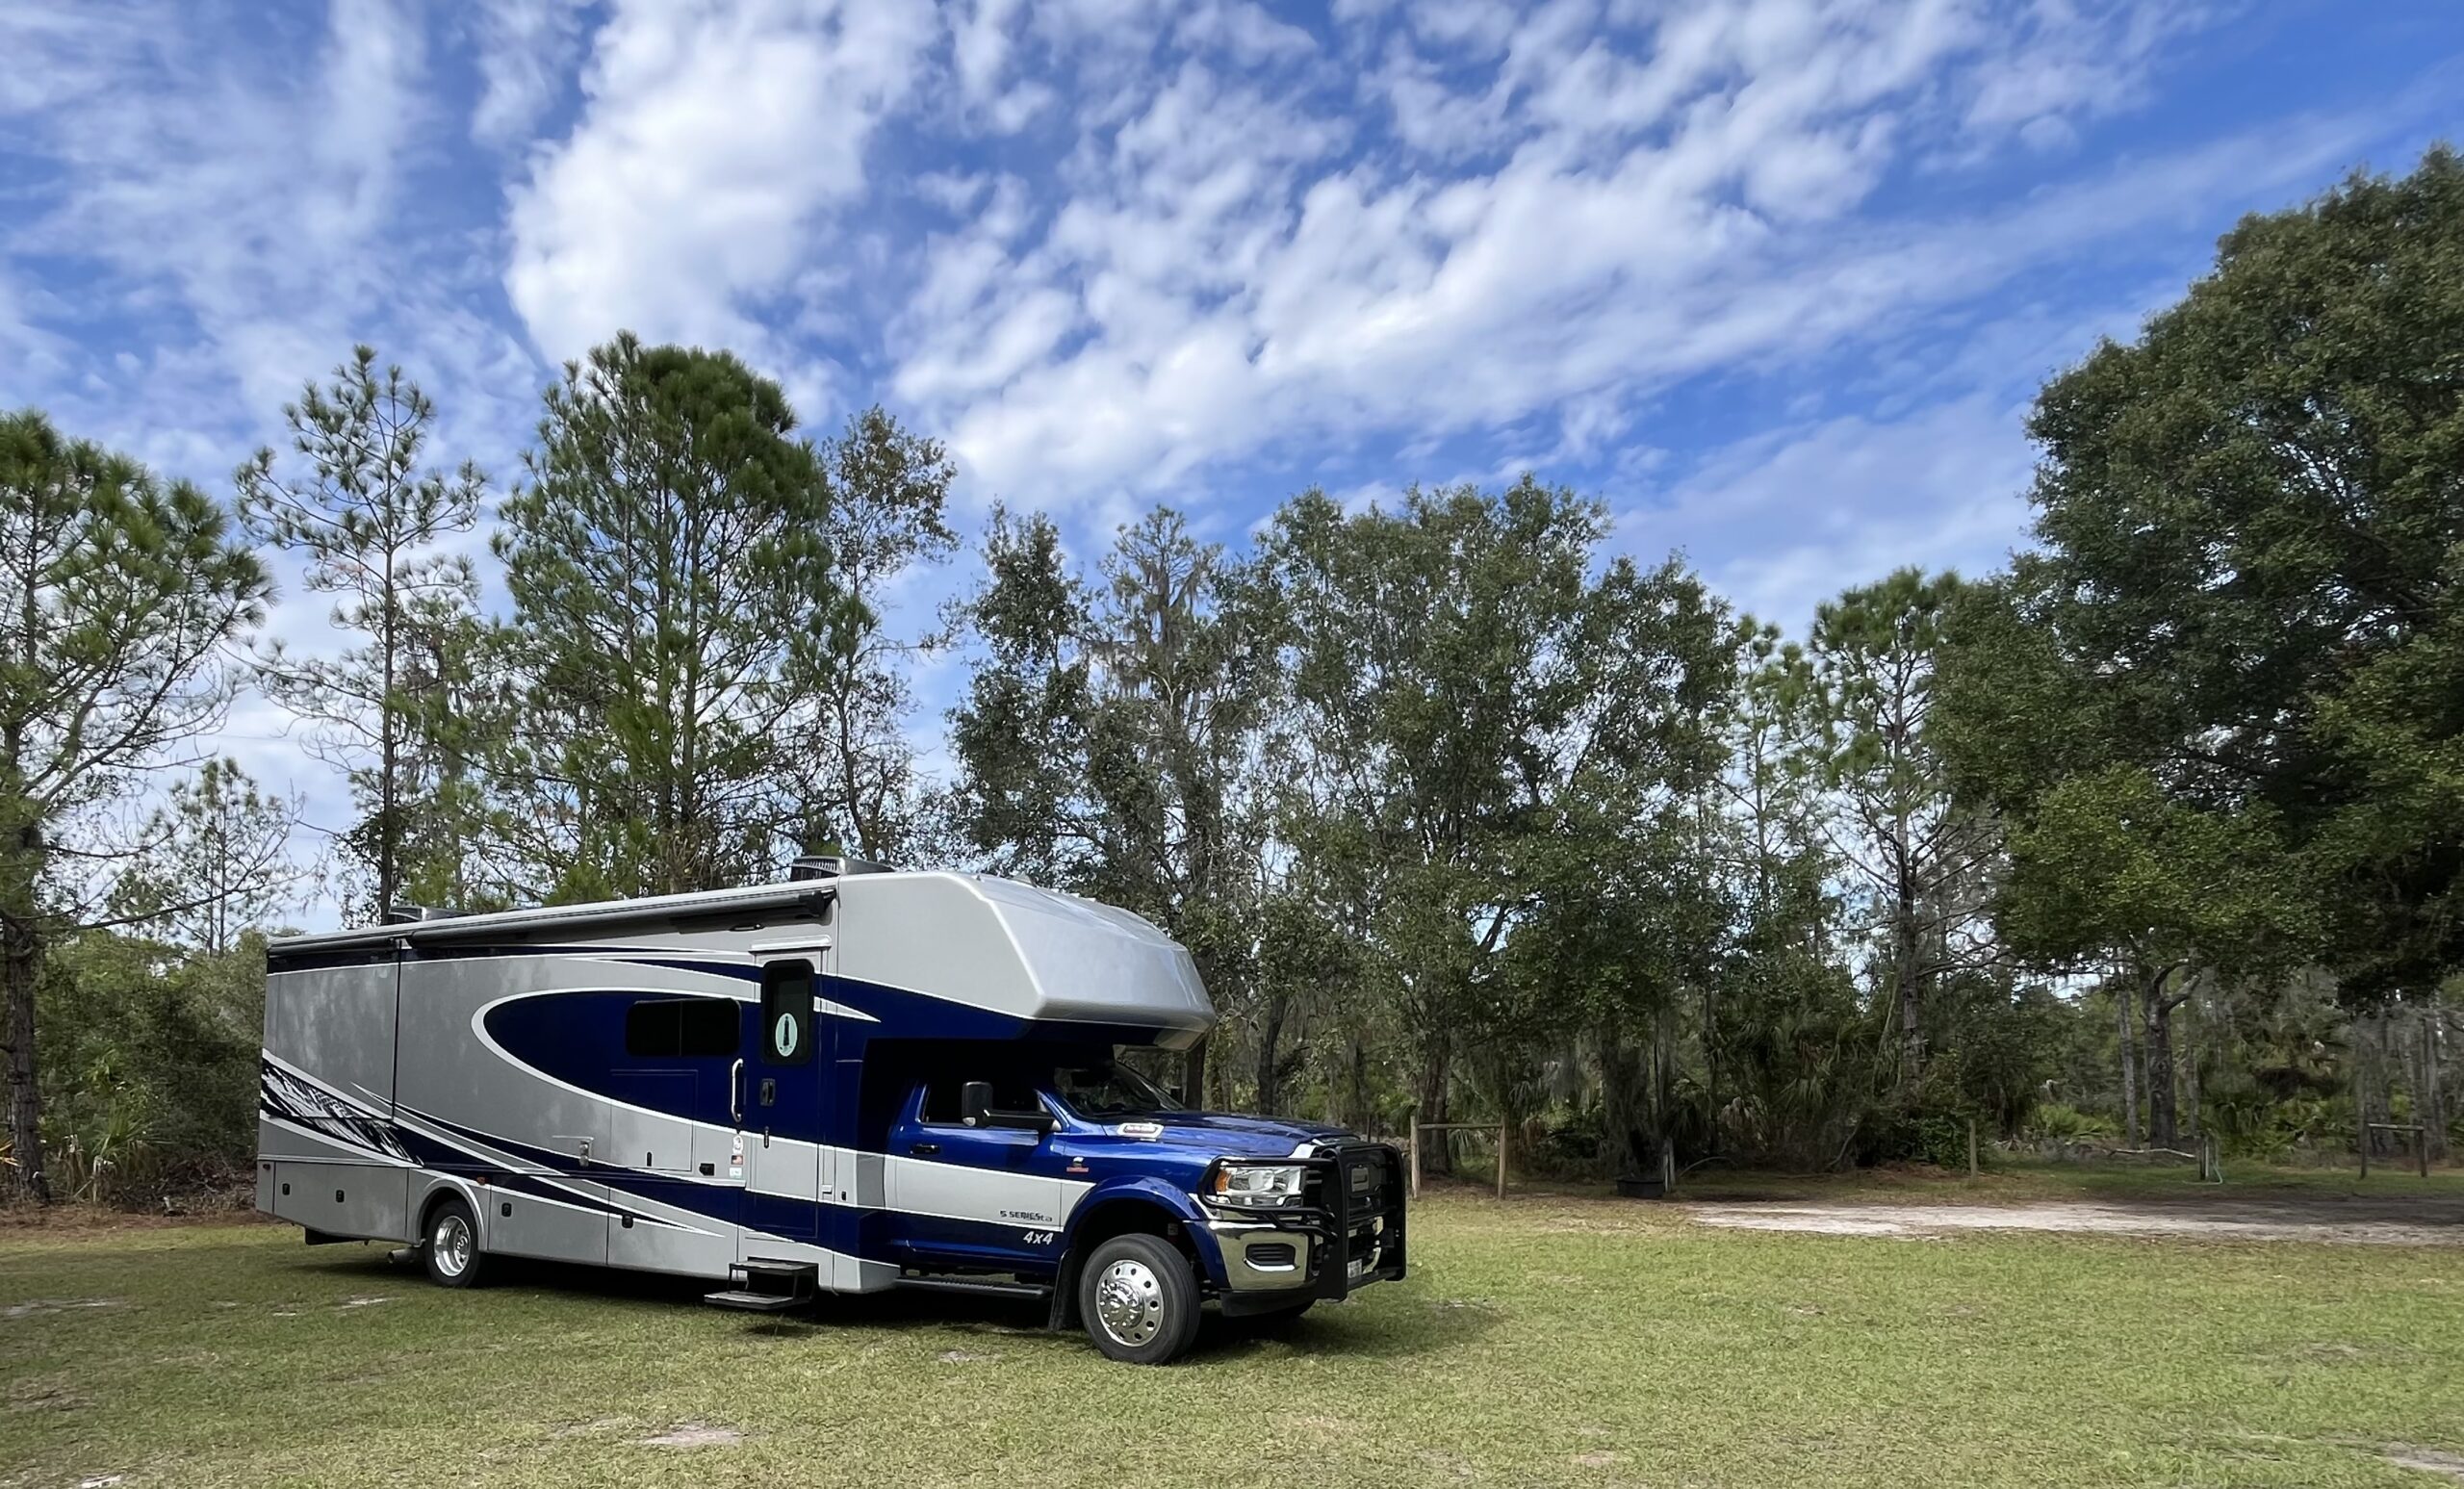 Elevated RV Adventures: The Losos Share Their LiquidSpring Experience